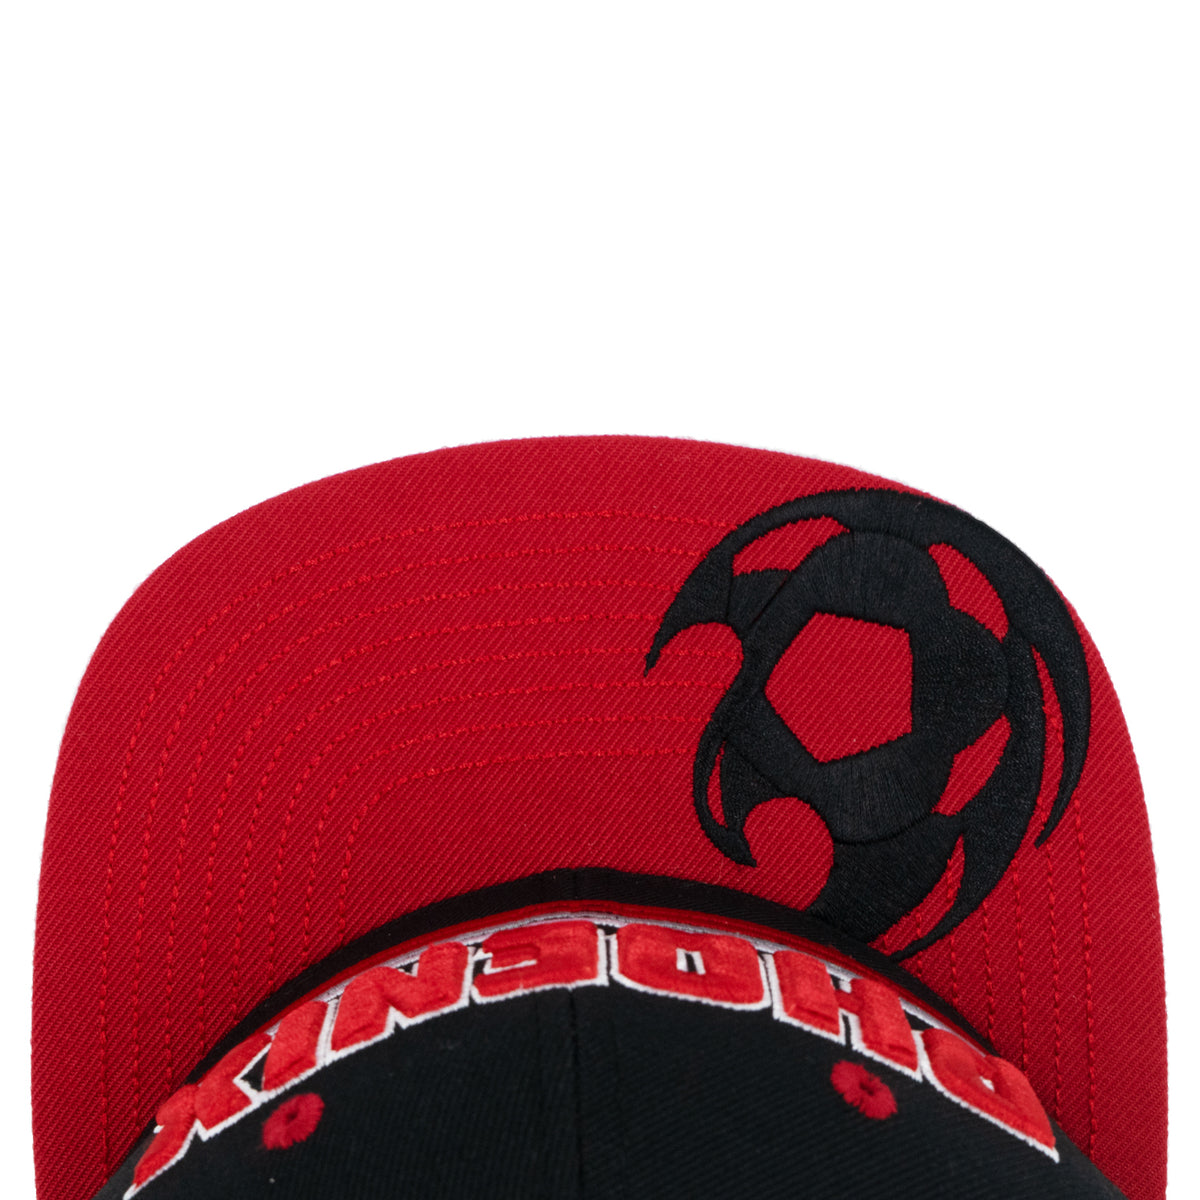 Phoenix Rising Youth Zephyr Pitch-a-Fit Snapback